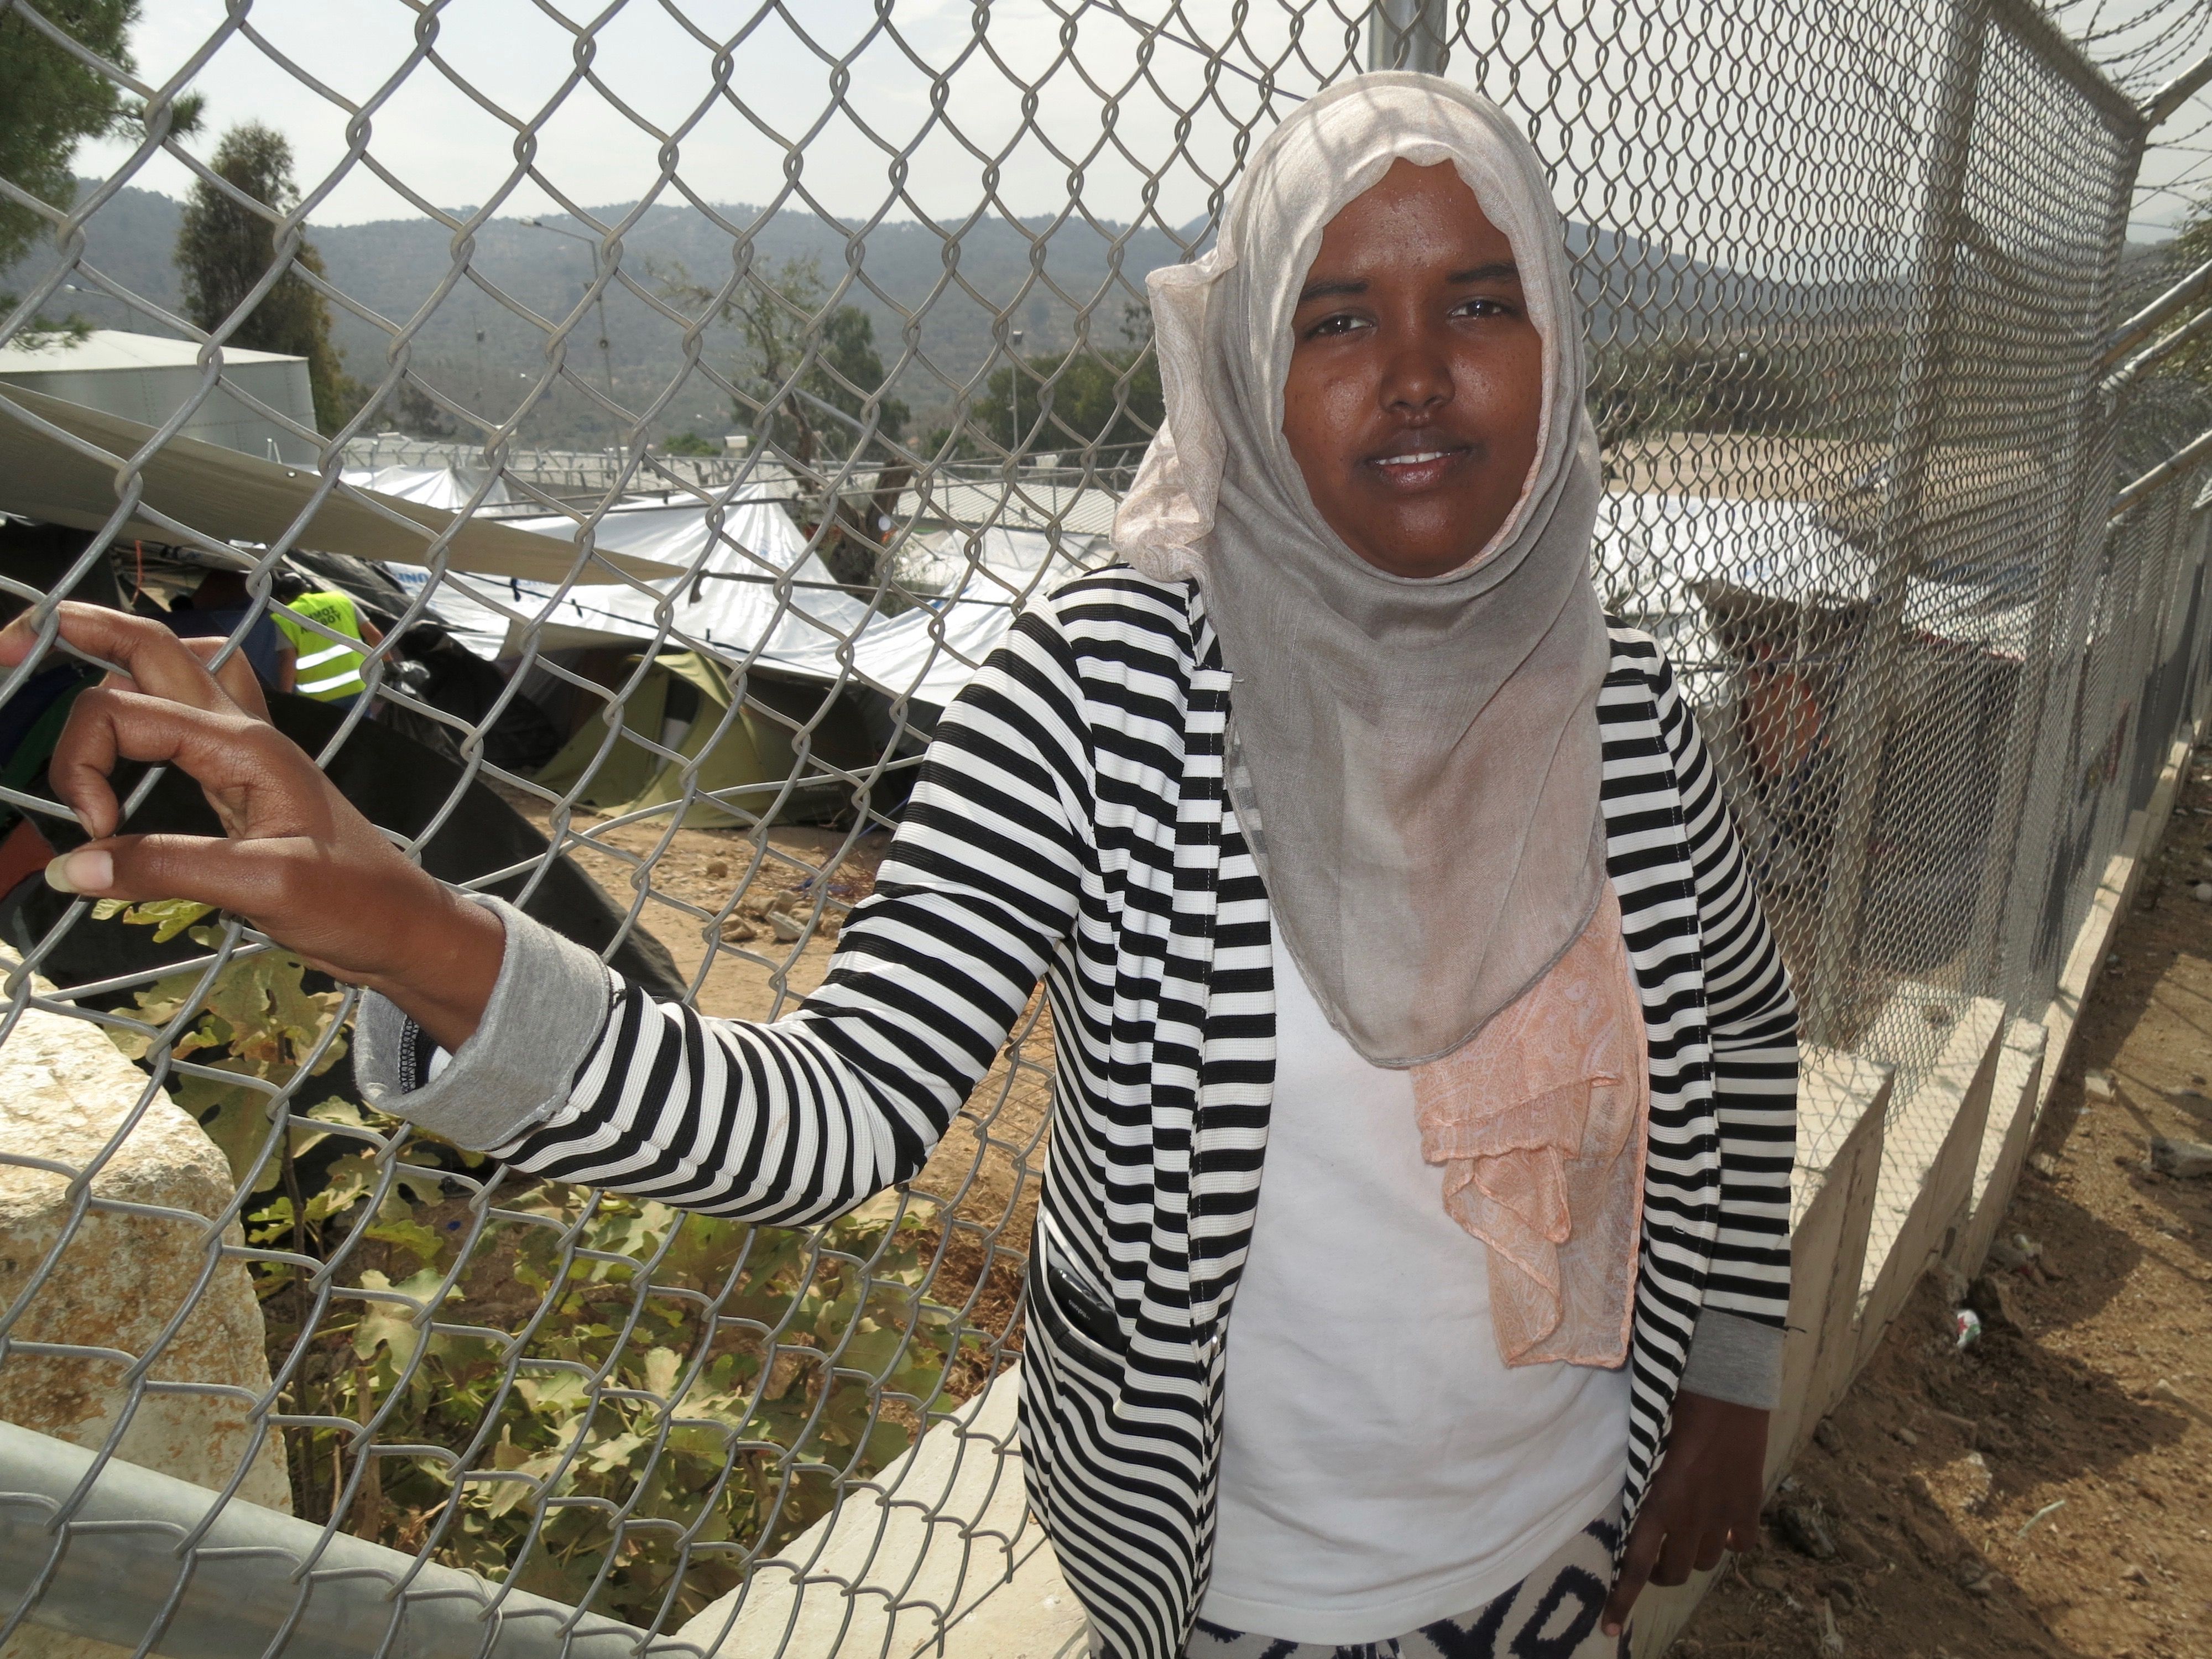 After being targeted by Al-Shaabab for being a journalist, Kowthar Adraman fled Somali. She is now in Moria refugee camp on Lesbos, Greece and seeks asylum in Europe. Image by Jeanne Carstensen. Greece, 2016. 